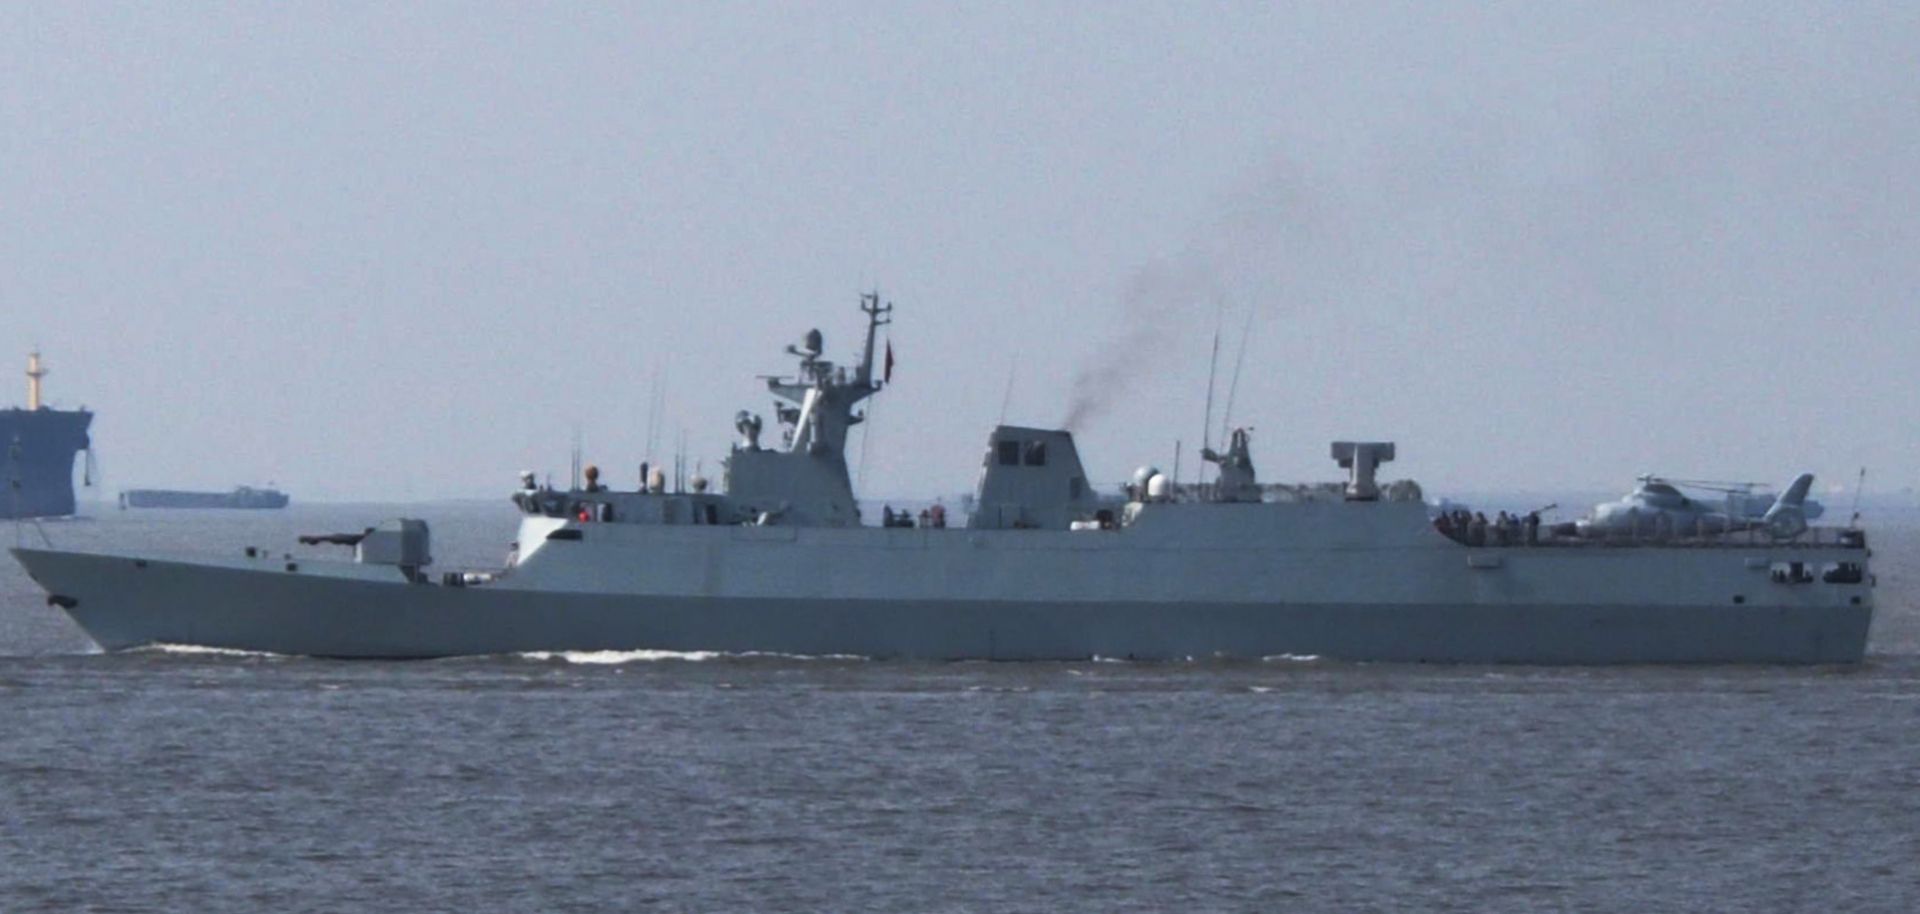 A Chinese Type 056 corvette photographed in May 2013. Beijing thus needs to develop robust anti-submarine warfare capabilities to keep submarines out of the first island chain, where many mainland and naval targets would be in range of attack.